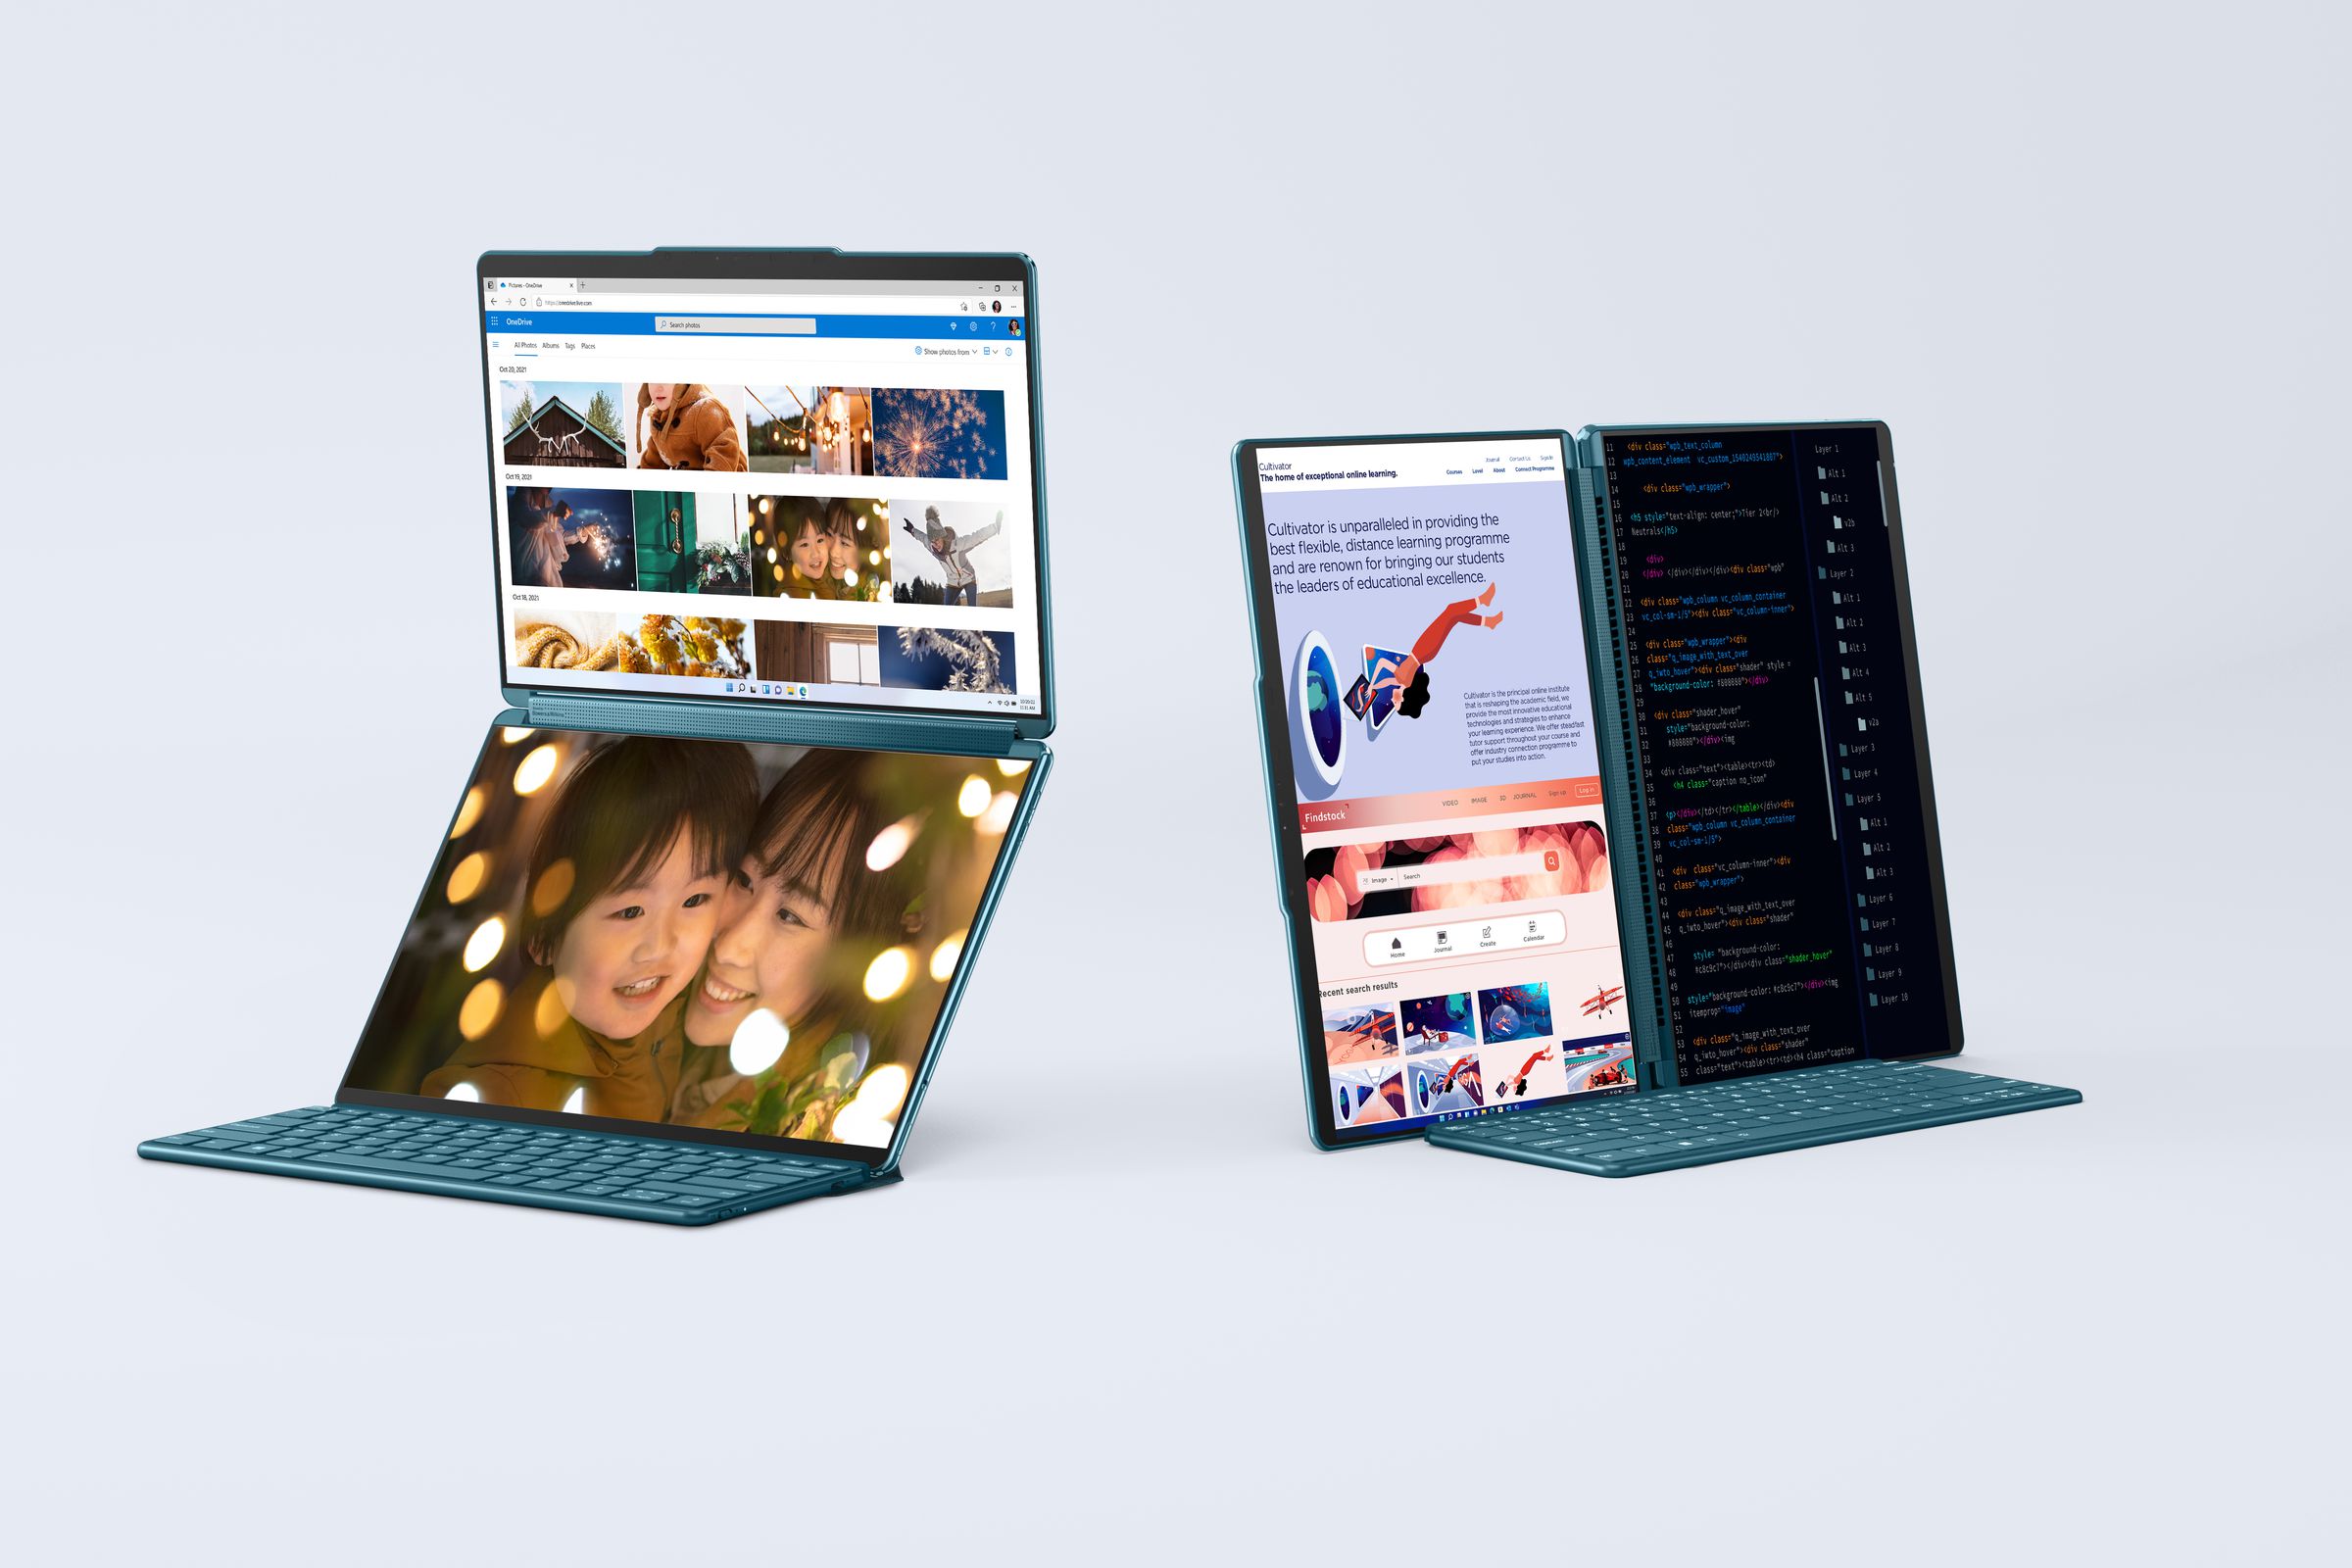 Two of the dual-monitor Yoga Book 9i laptops sitting side by side. One is open in a vertical orientation with the two screens stacked atop one another and the keyboard magnetically attached on the bottom. The other has the screens side by side like a large book, with the keyboard attached in front at the base.